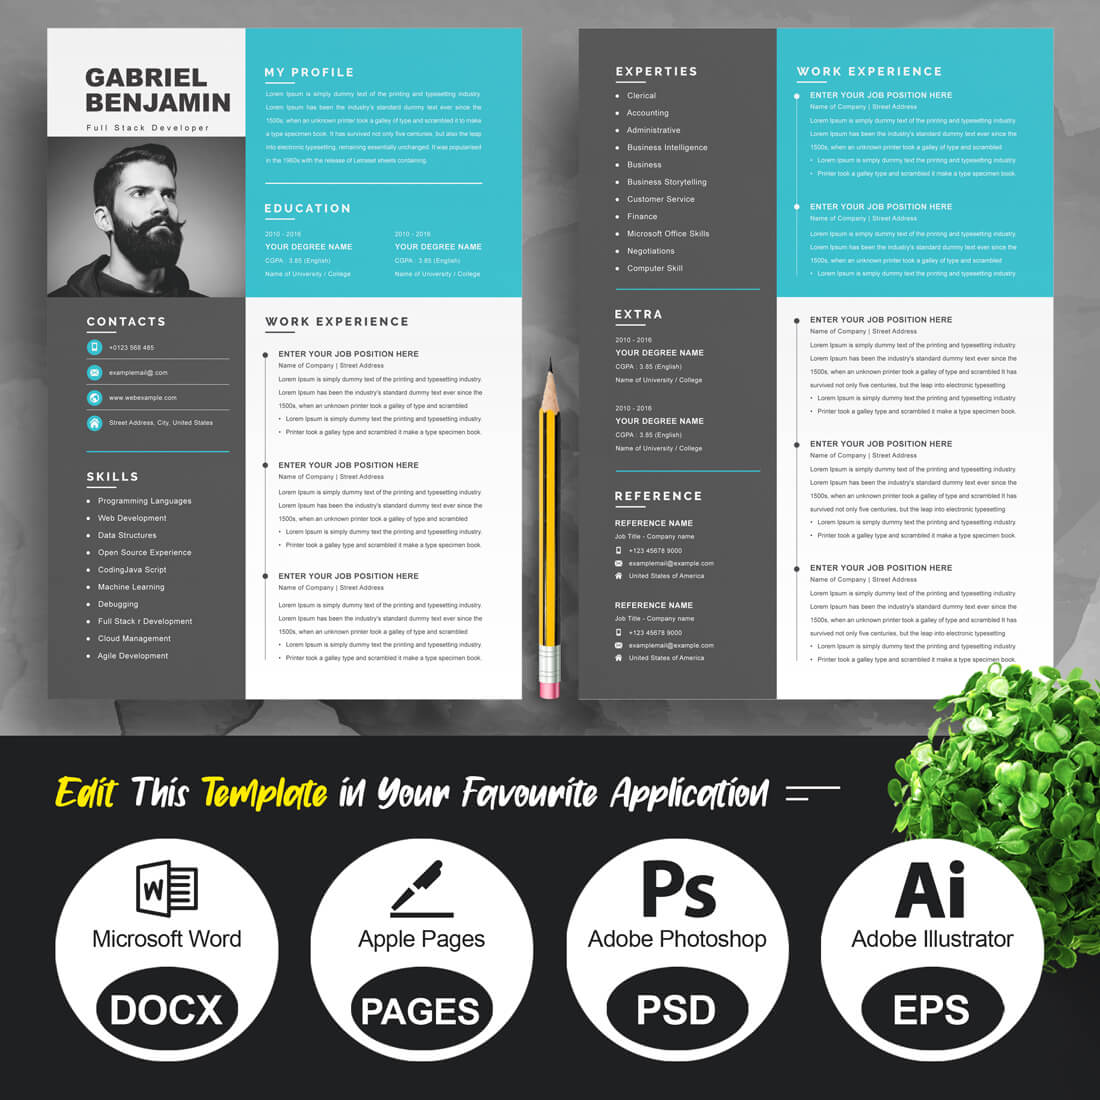 Full Stack Developer Resume Template | Professional Resume Template in Word & PSD Format preview image.